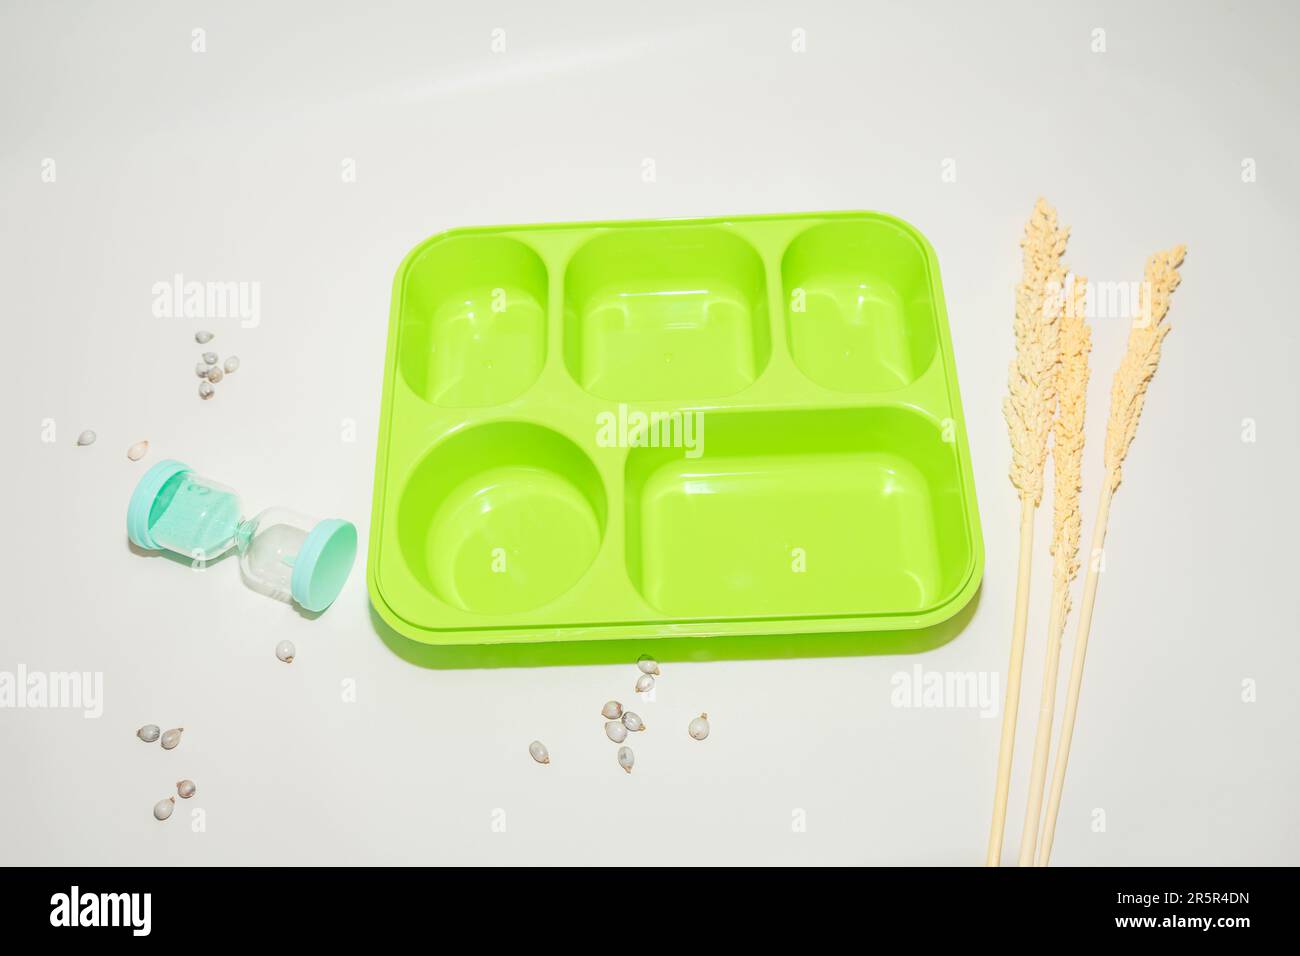 The Green Plastic Lunch Box is a convenient and practical meal storage solution. Stock Photo